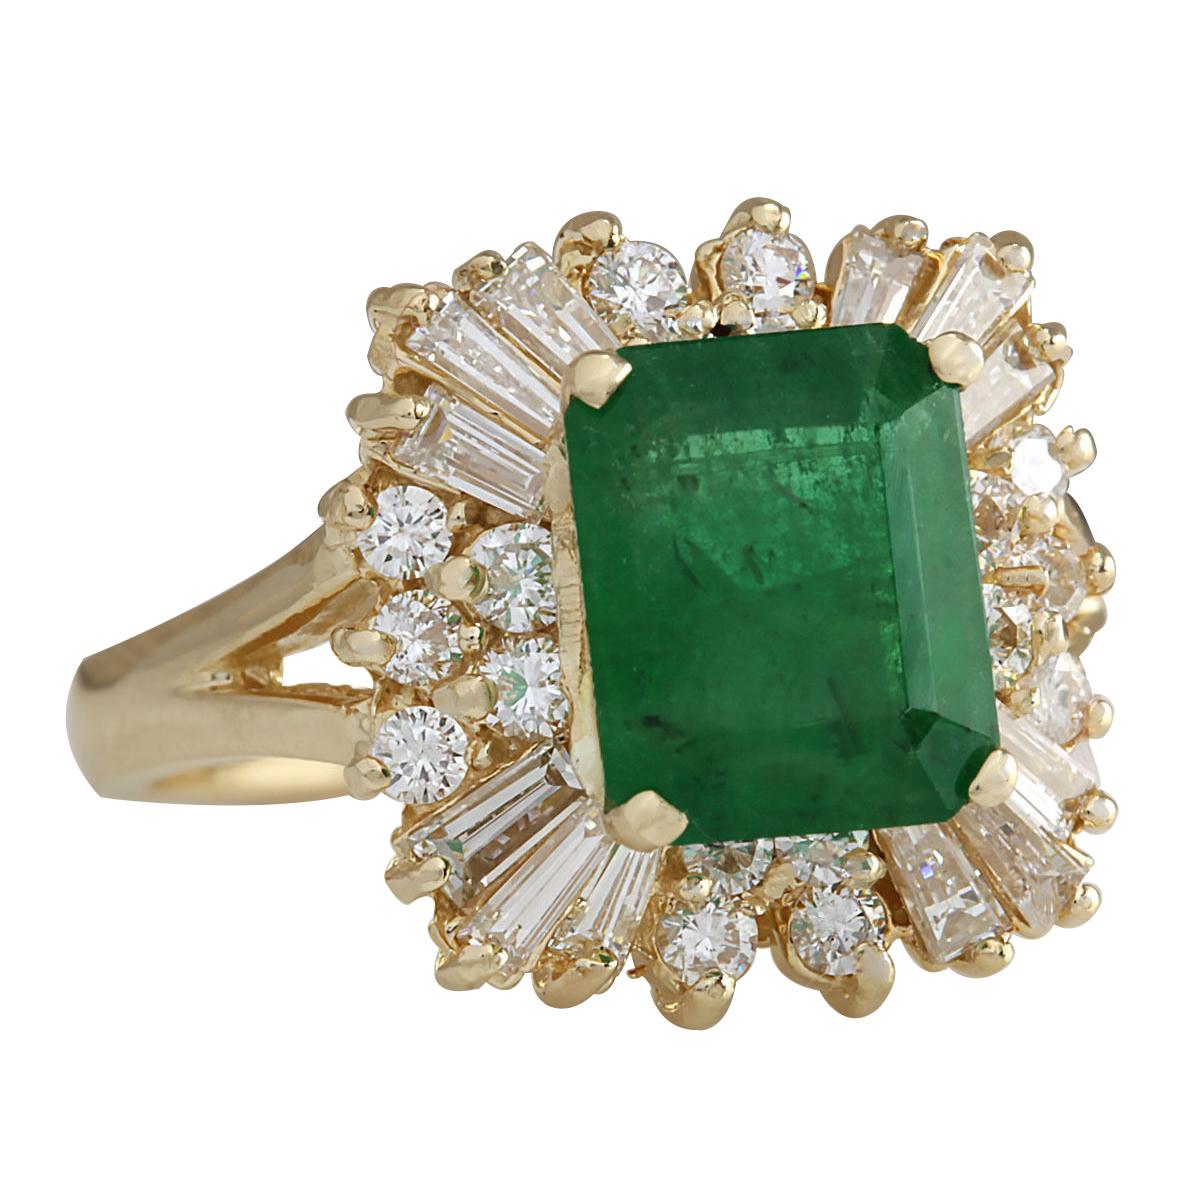 Stamped: 14K Yellow Gold
Ring Weight: 6.1 Grams
Total Natural Emerald Weight is 2.54 Carat (Measures: 9.50x7.50 mm)
Color: Green
Total Natural Diamond Weight is 1.28 Carat
Color: F-G, Clarity: VS2-SI1
Face Measures: 15.77x15.43 mm
Sku: [702801W]
